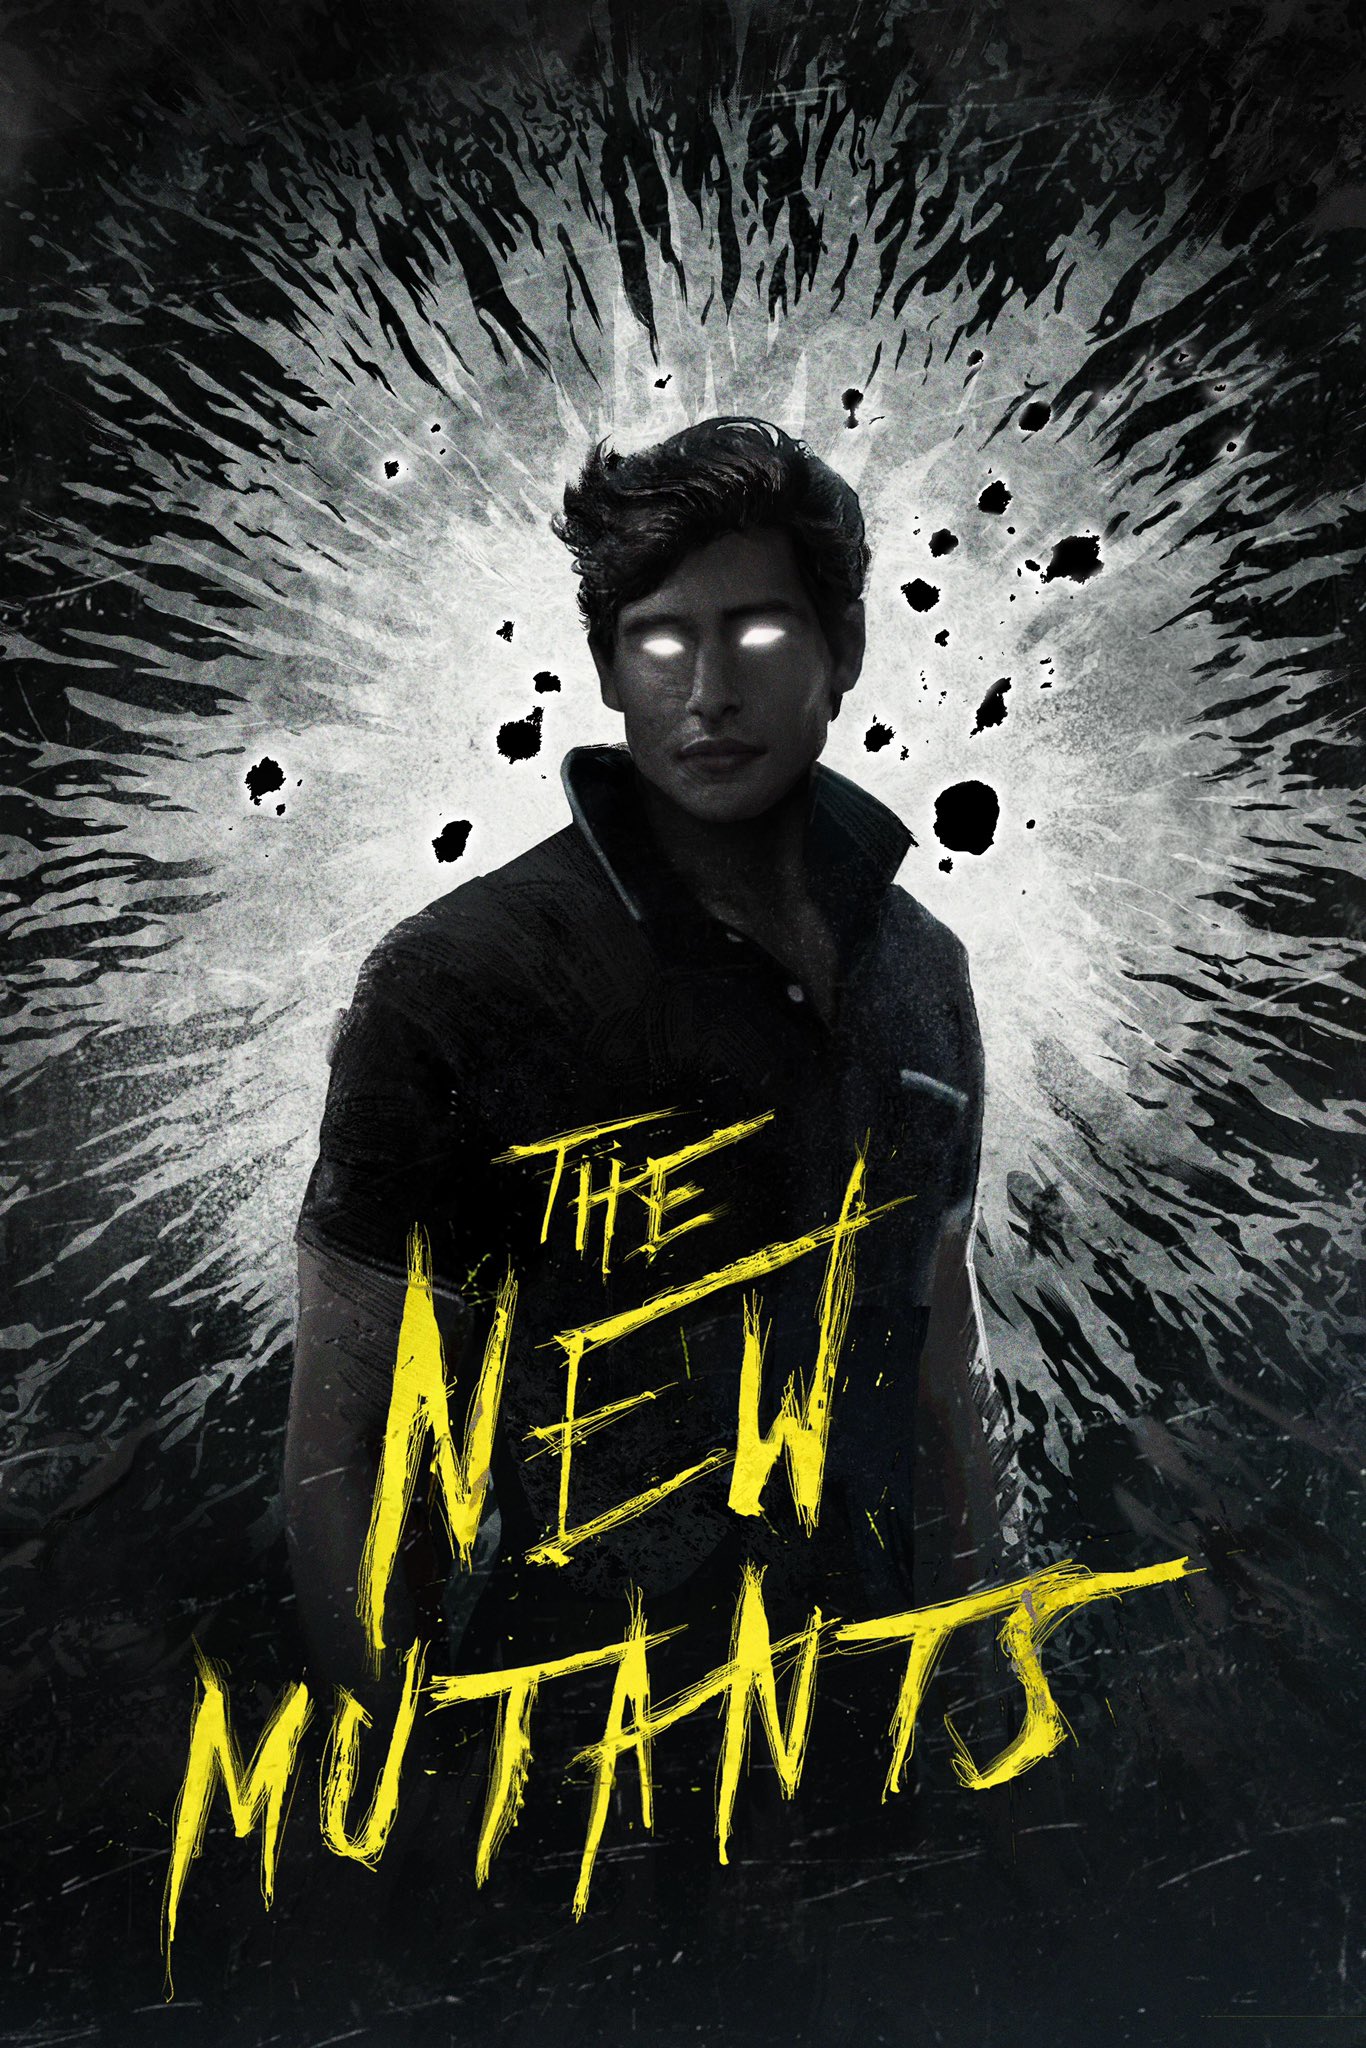 Henry Zaga and Blu Hunt to be members of the New Mutants